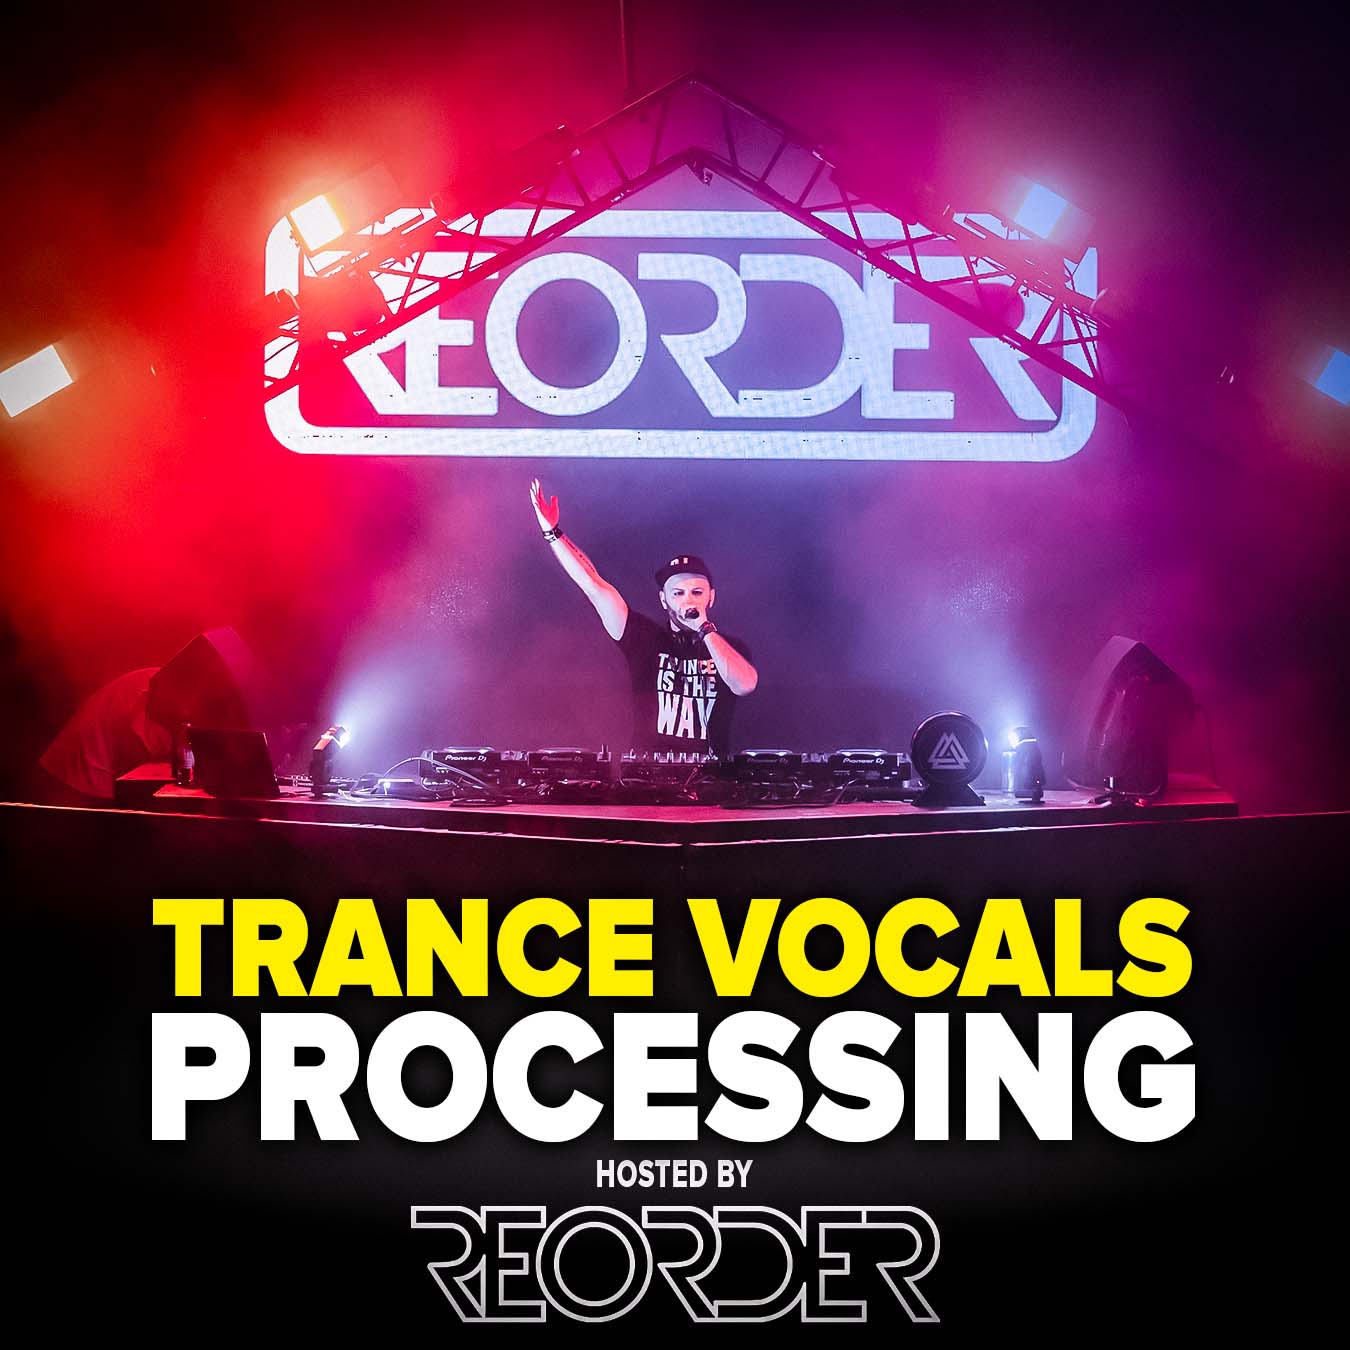 how to make trance vocals in ableton live, trance vocals processing, vocal mixing with reorder